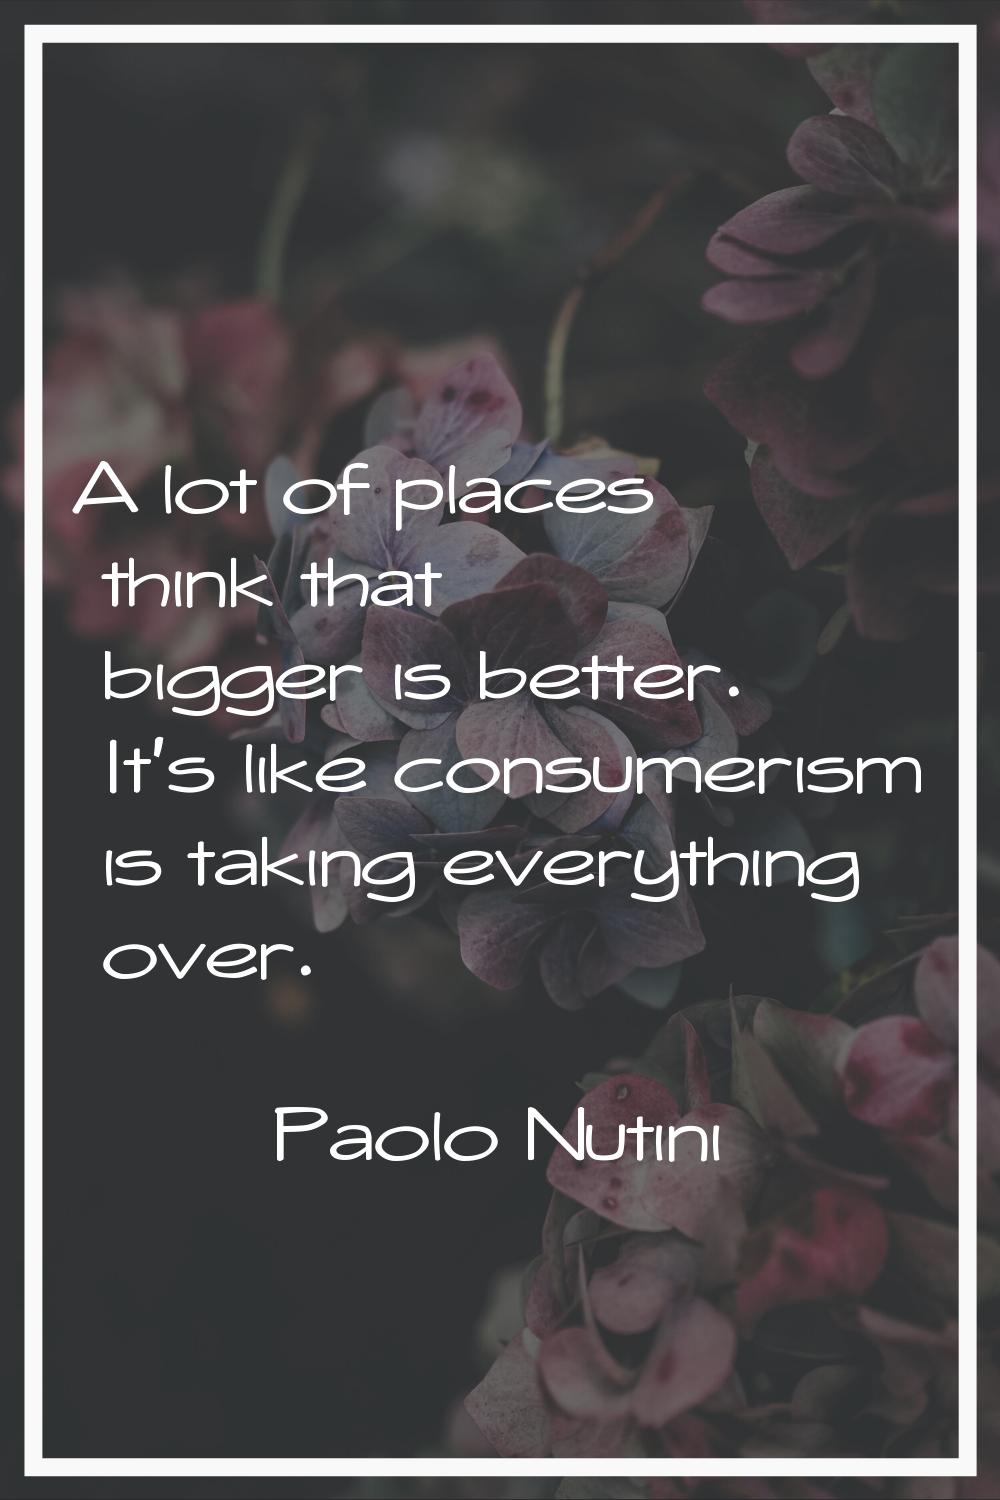 A lot of places think that bigger is better. It's like consumerism is taking everything over.